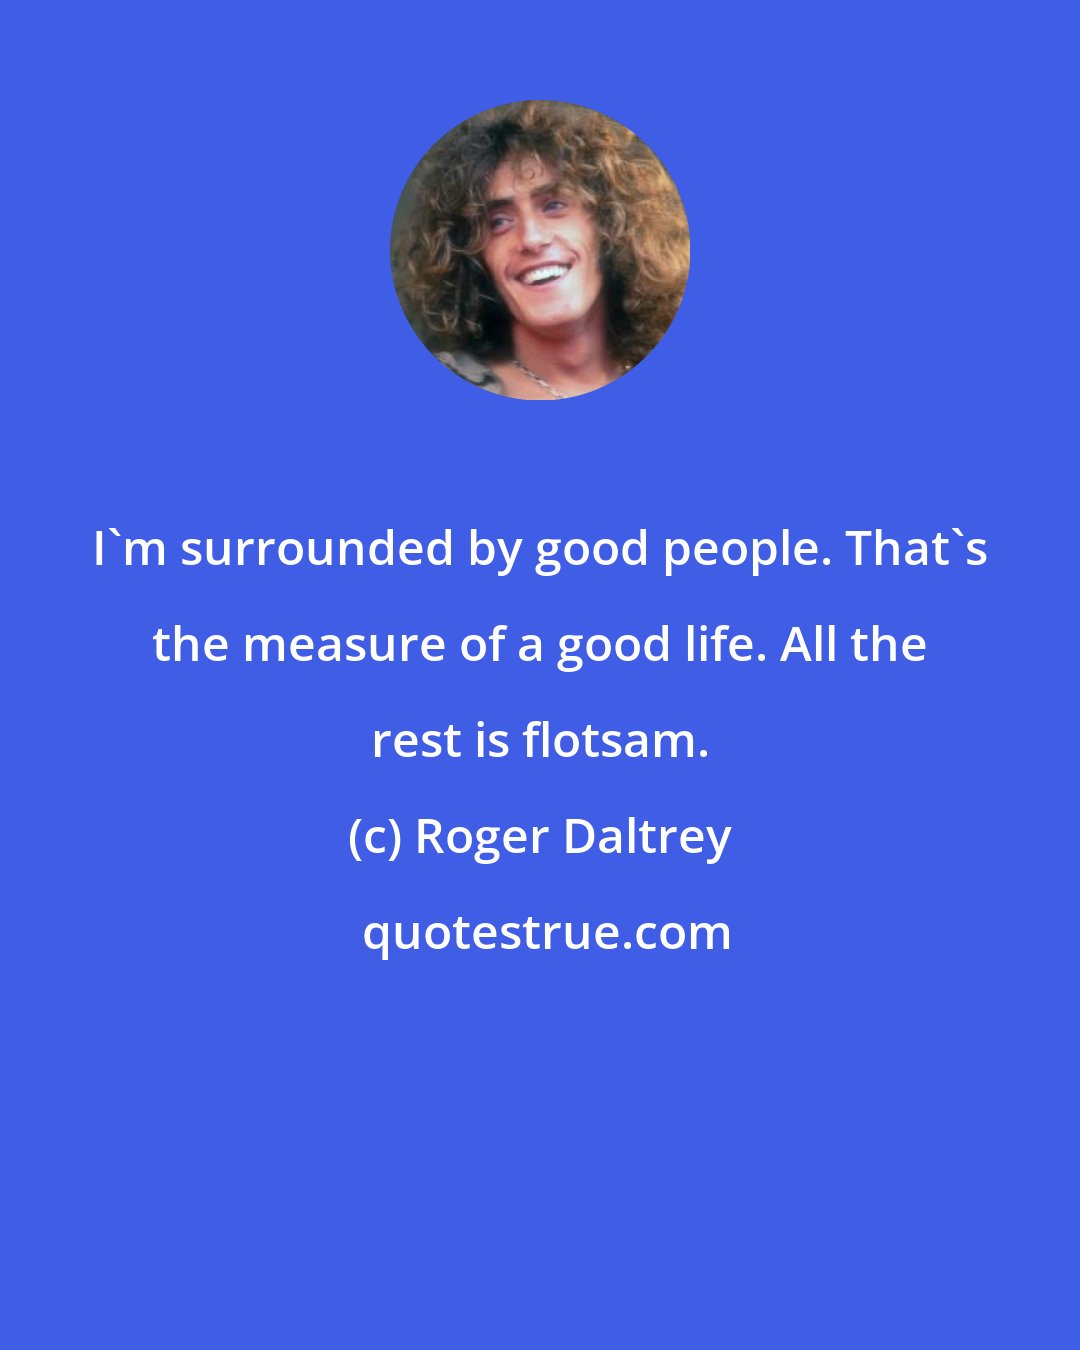 Roger Daltrey: I'm surrounded by good people. That's the measure of a good life. All the rest is flotsam.